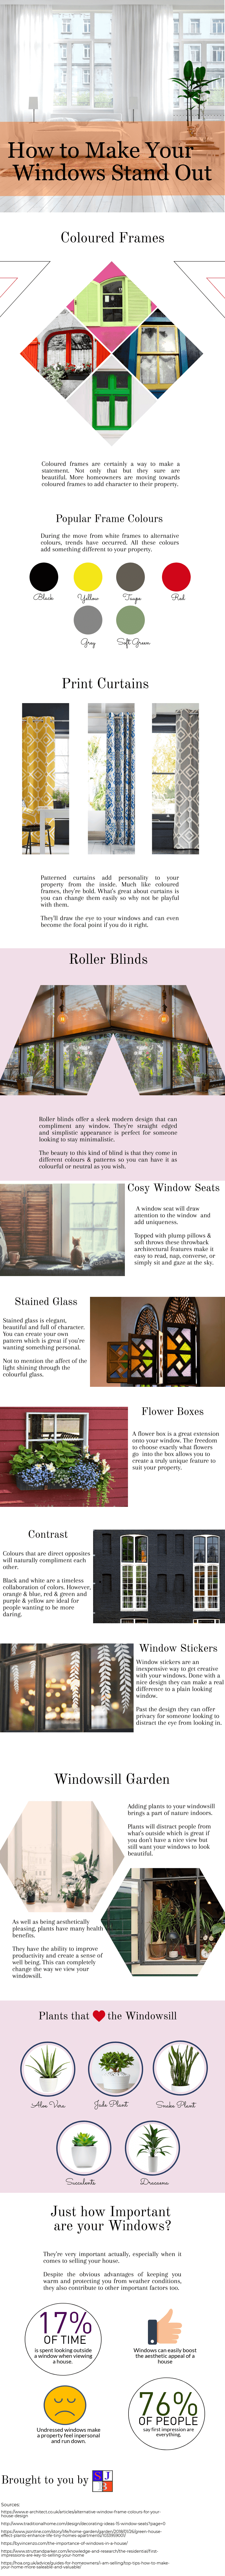 Know How To Make Your Windows Stand Out